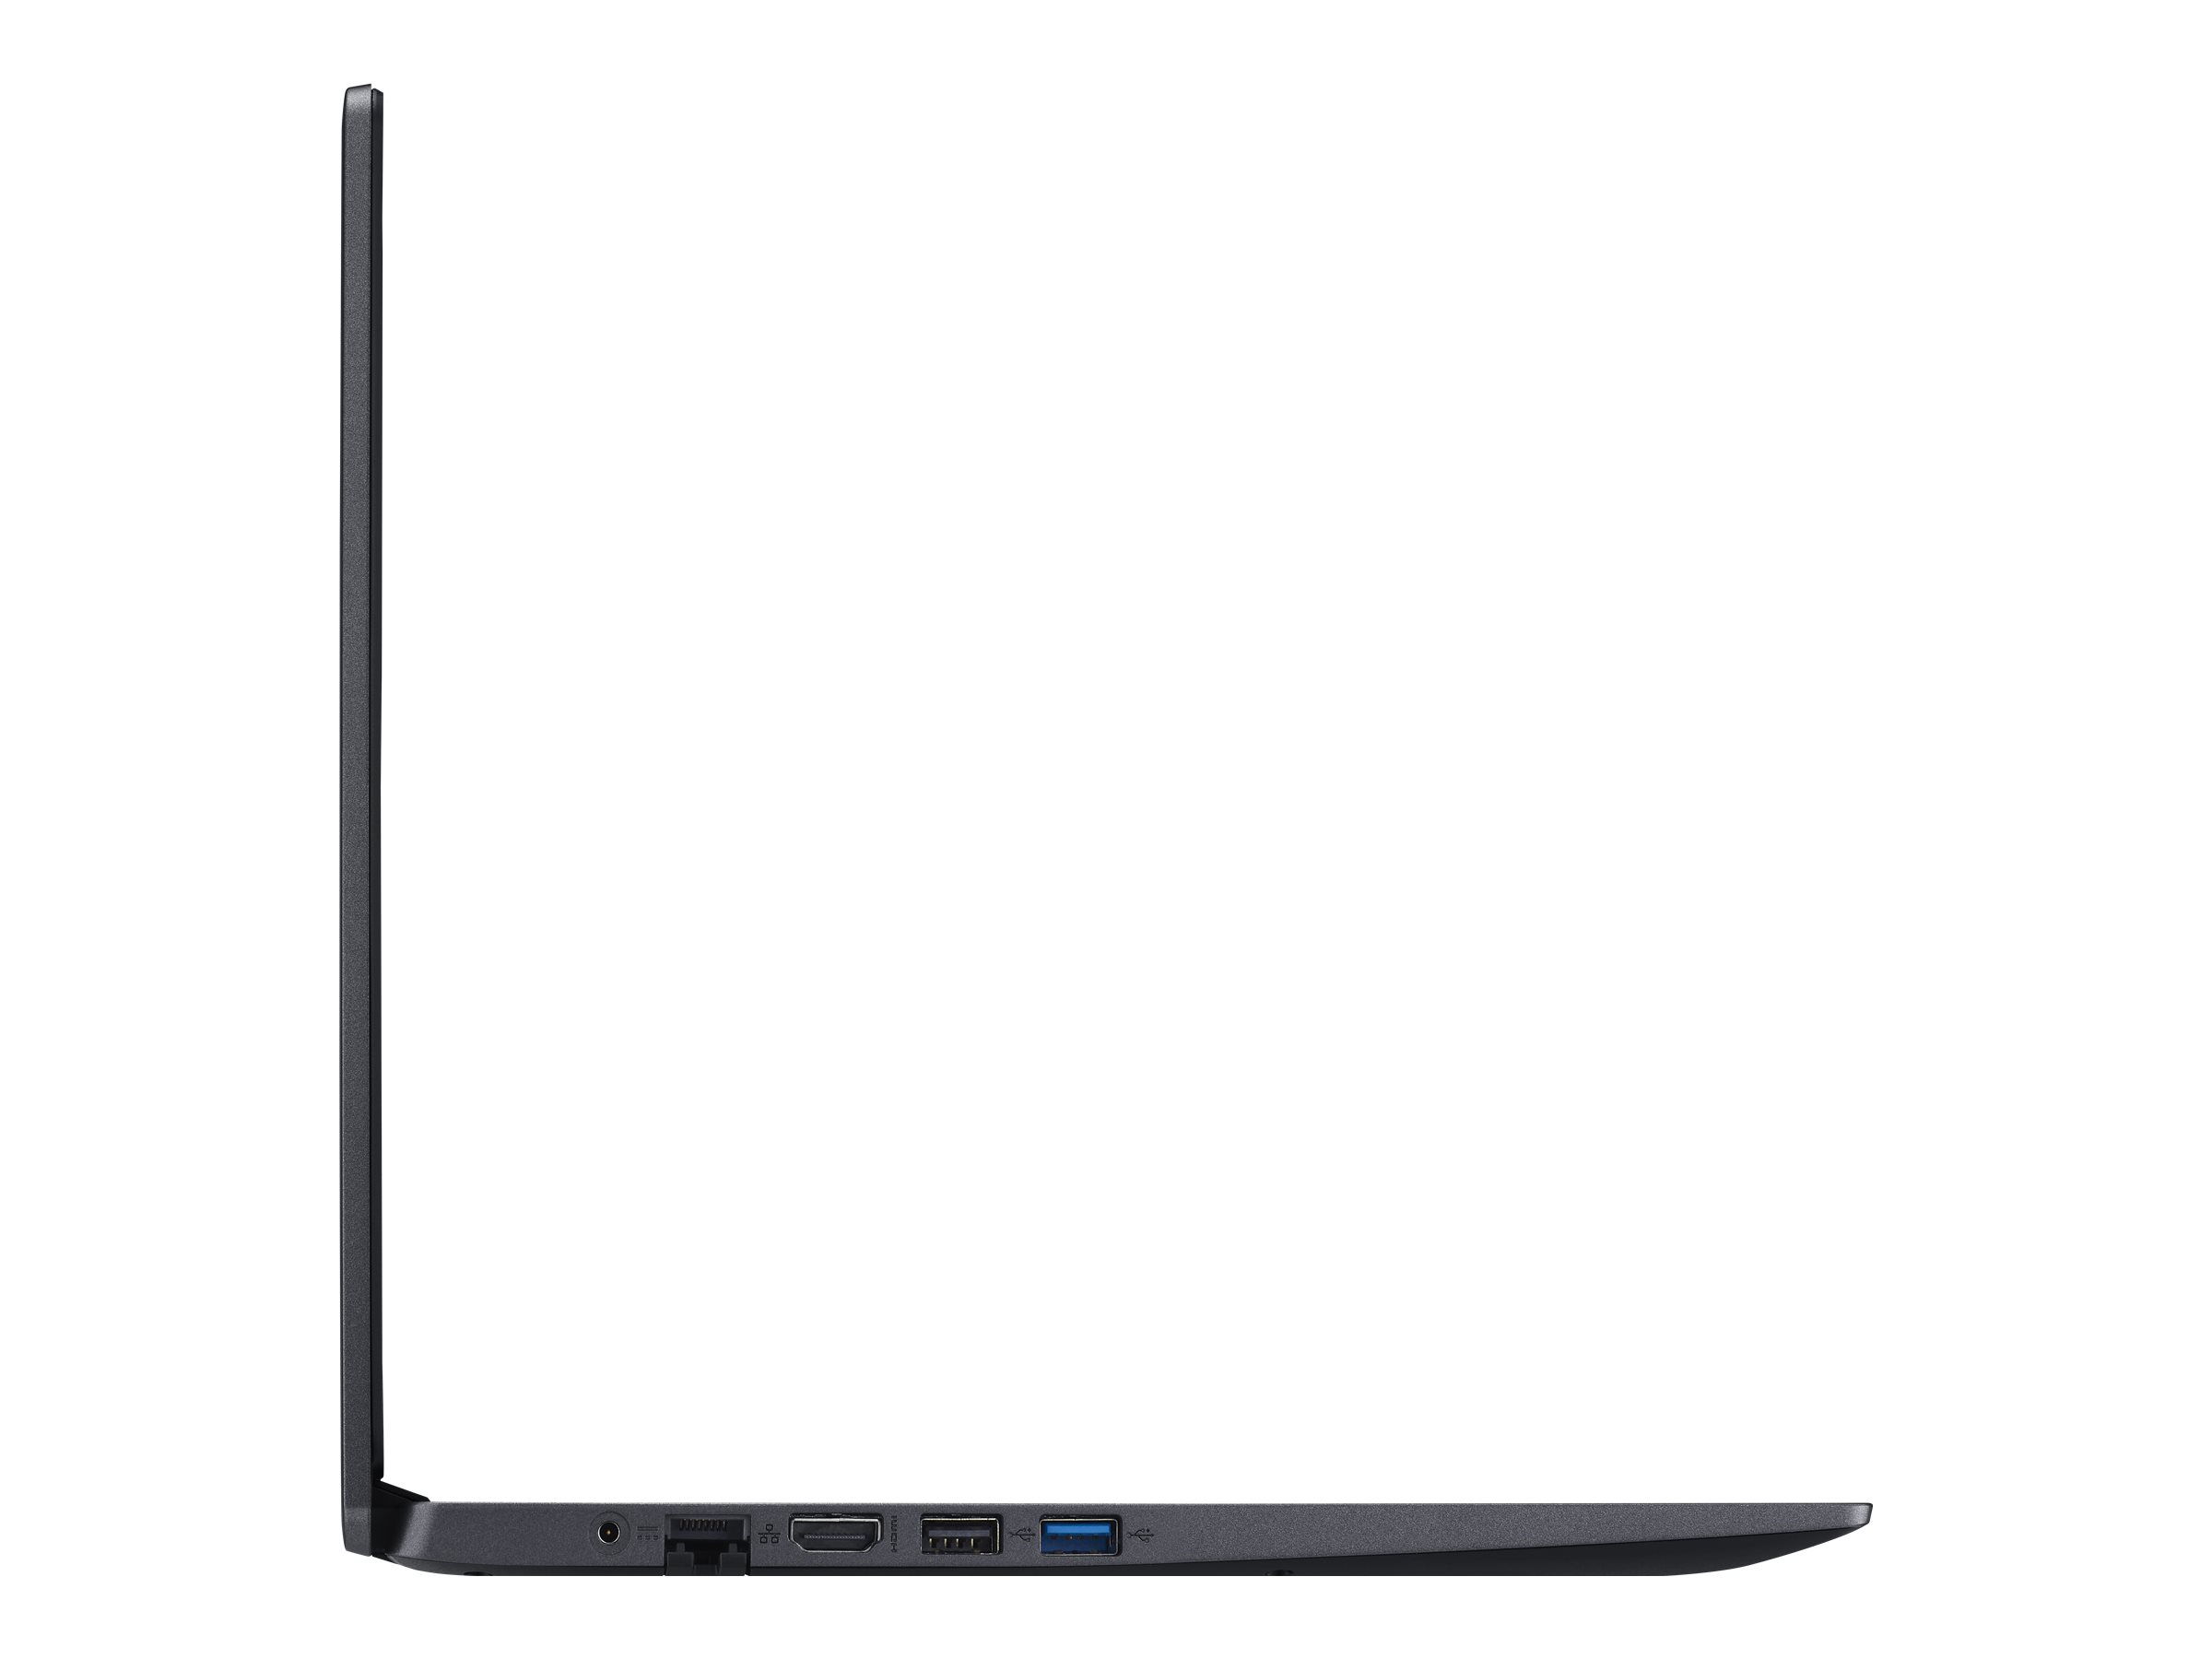 Restored Acer Aspire 1 A115-31-C2Y3, 15.6" Full HD Display, Intel Celeron N4020, 4GB DDR4, 64GB eMMC, 802.11ac Wi-Fi 5, Up to 10-Hours of Battery Life, Windows 10 in S mode, Black (Refurbished) - image 3 of 4